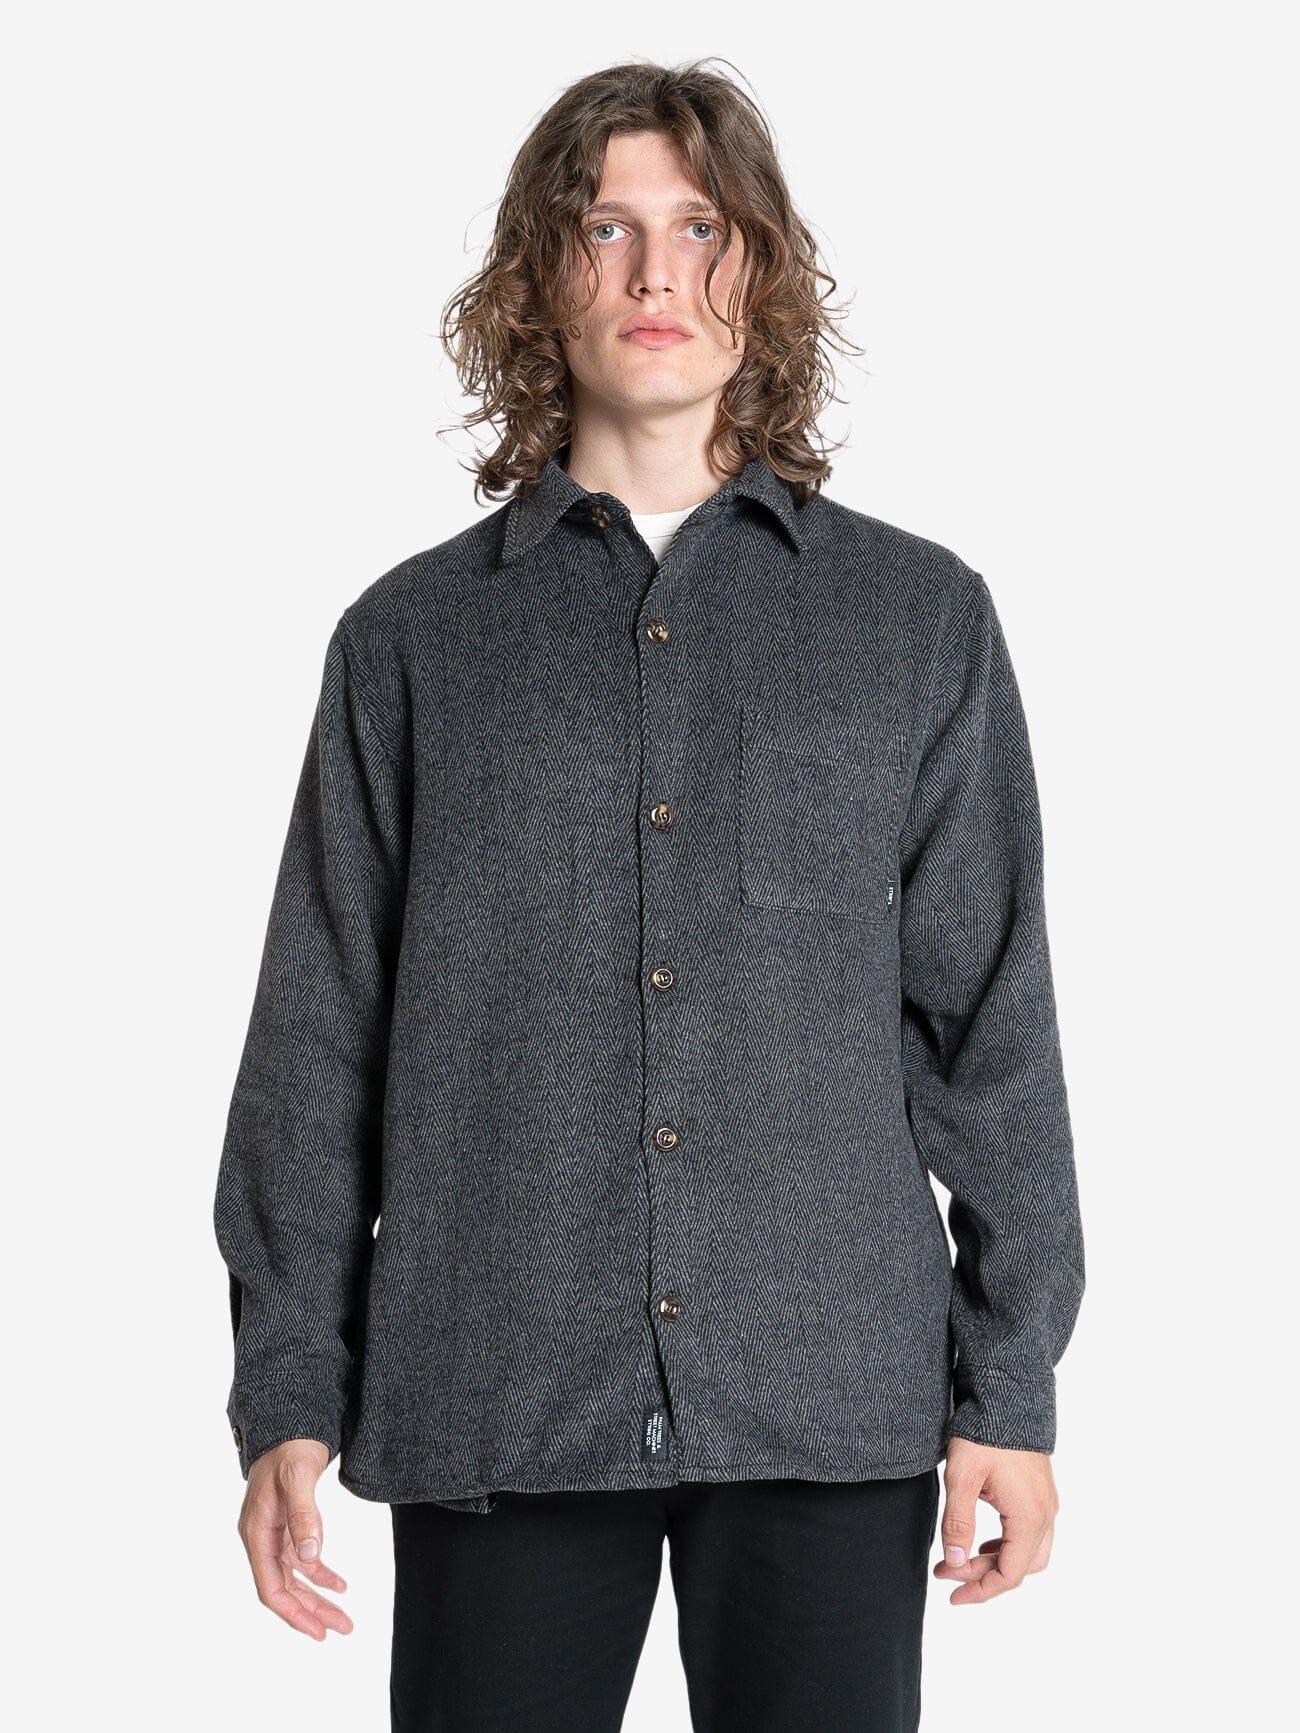 United Front Long Sleeve Flannel - Black XS